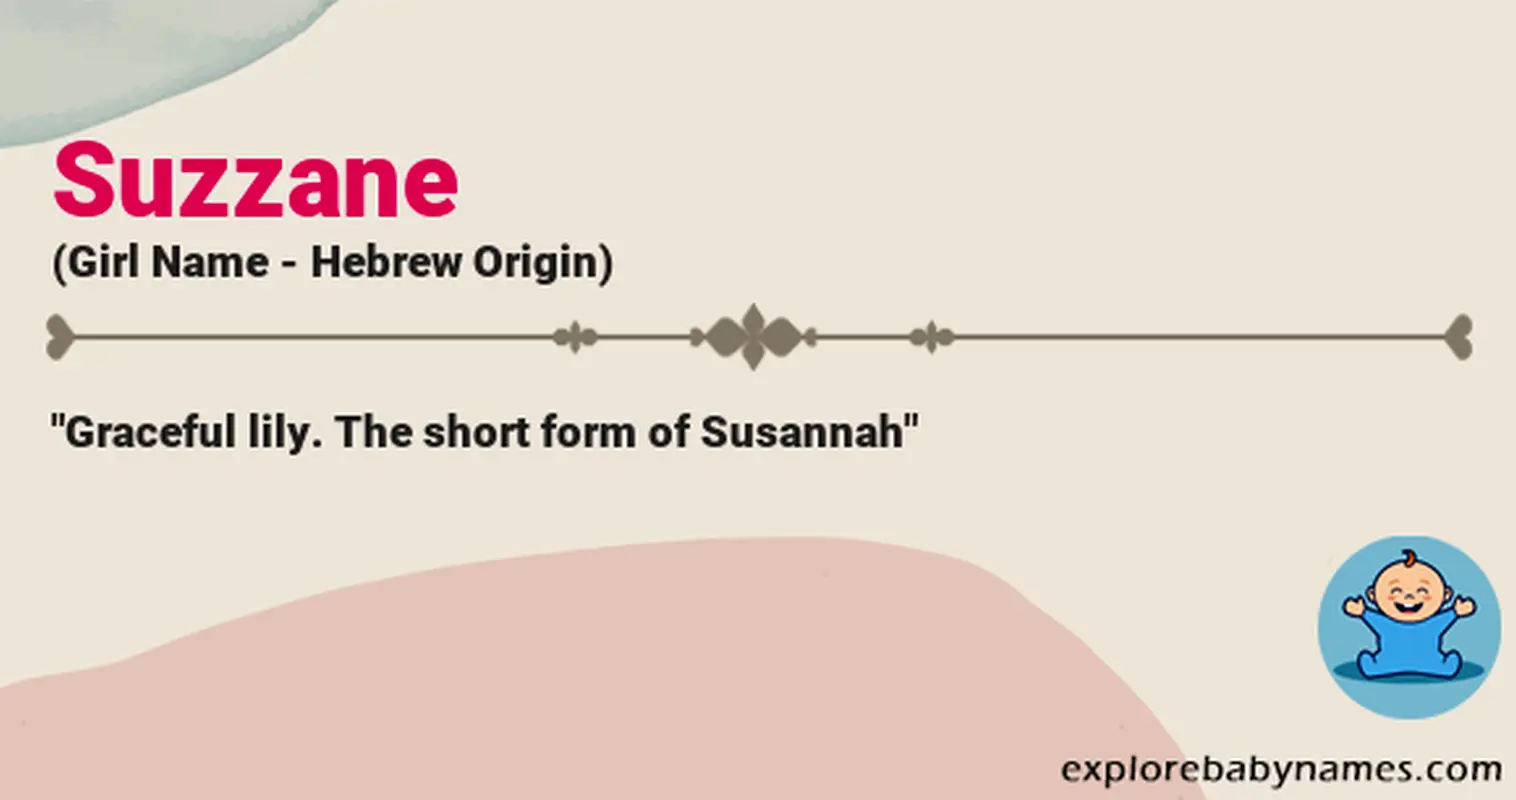 Meaning of Suzzane